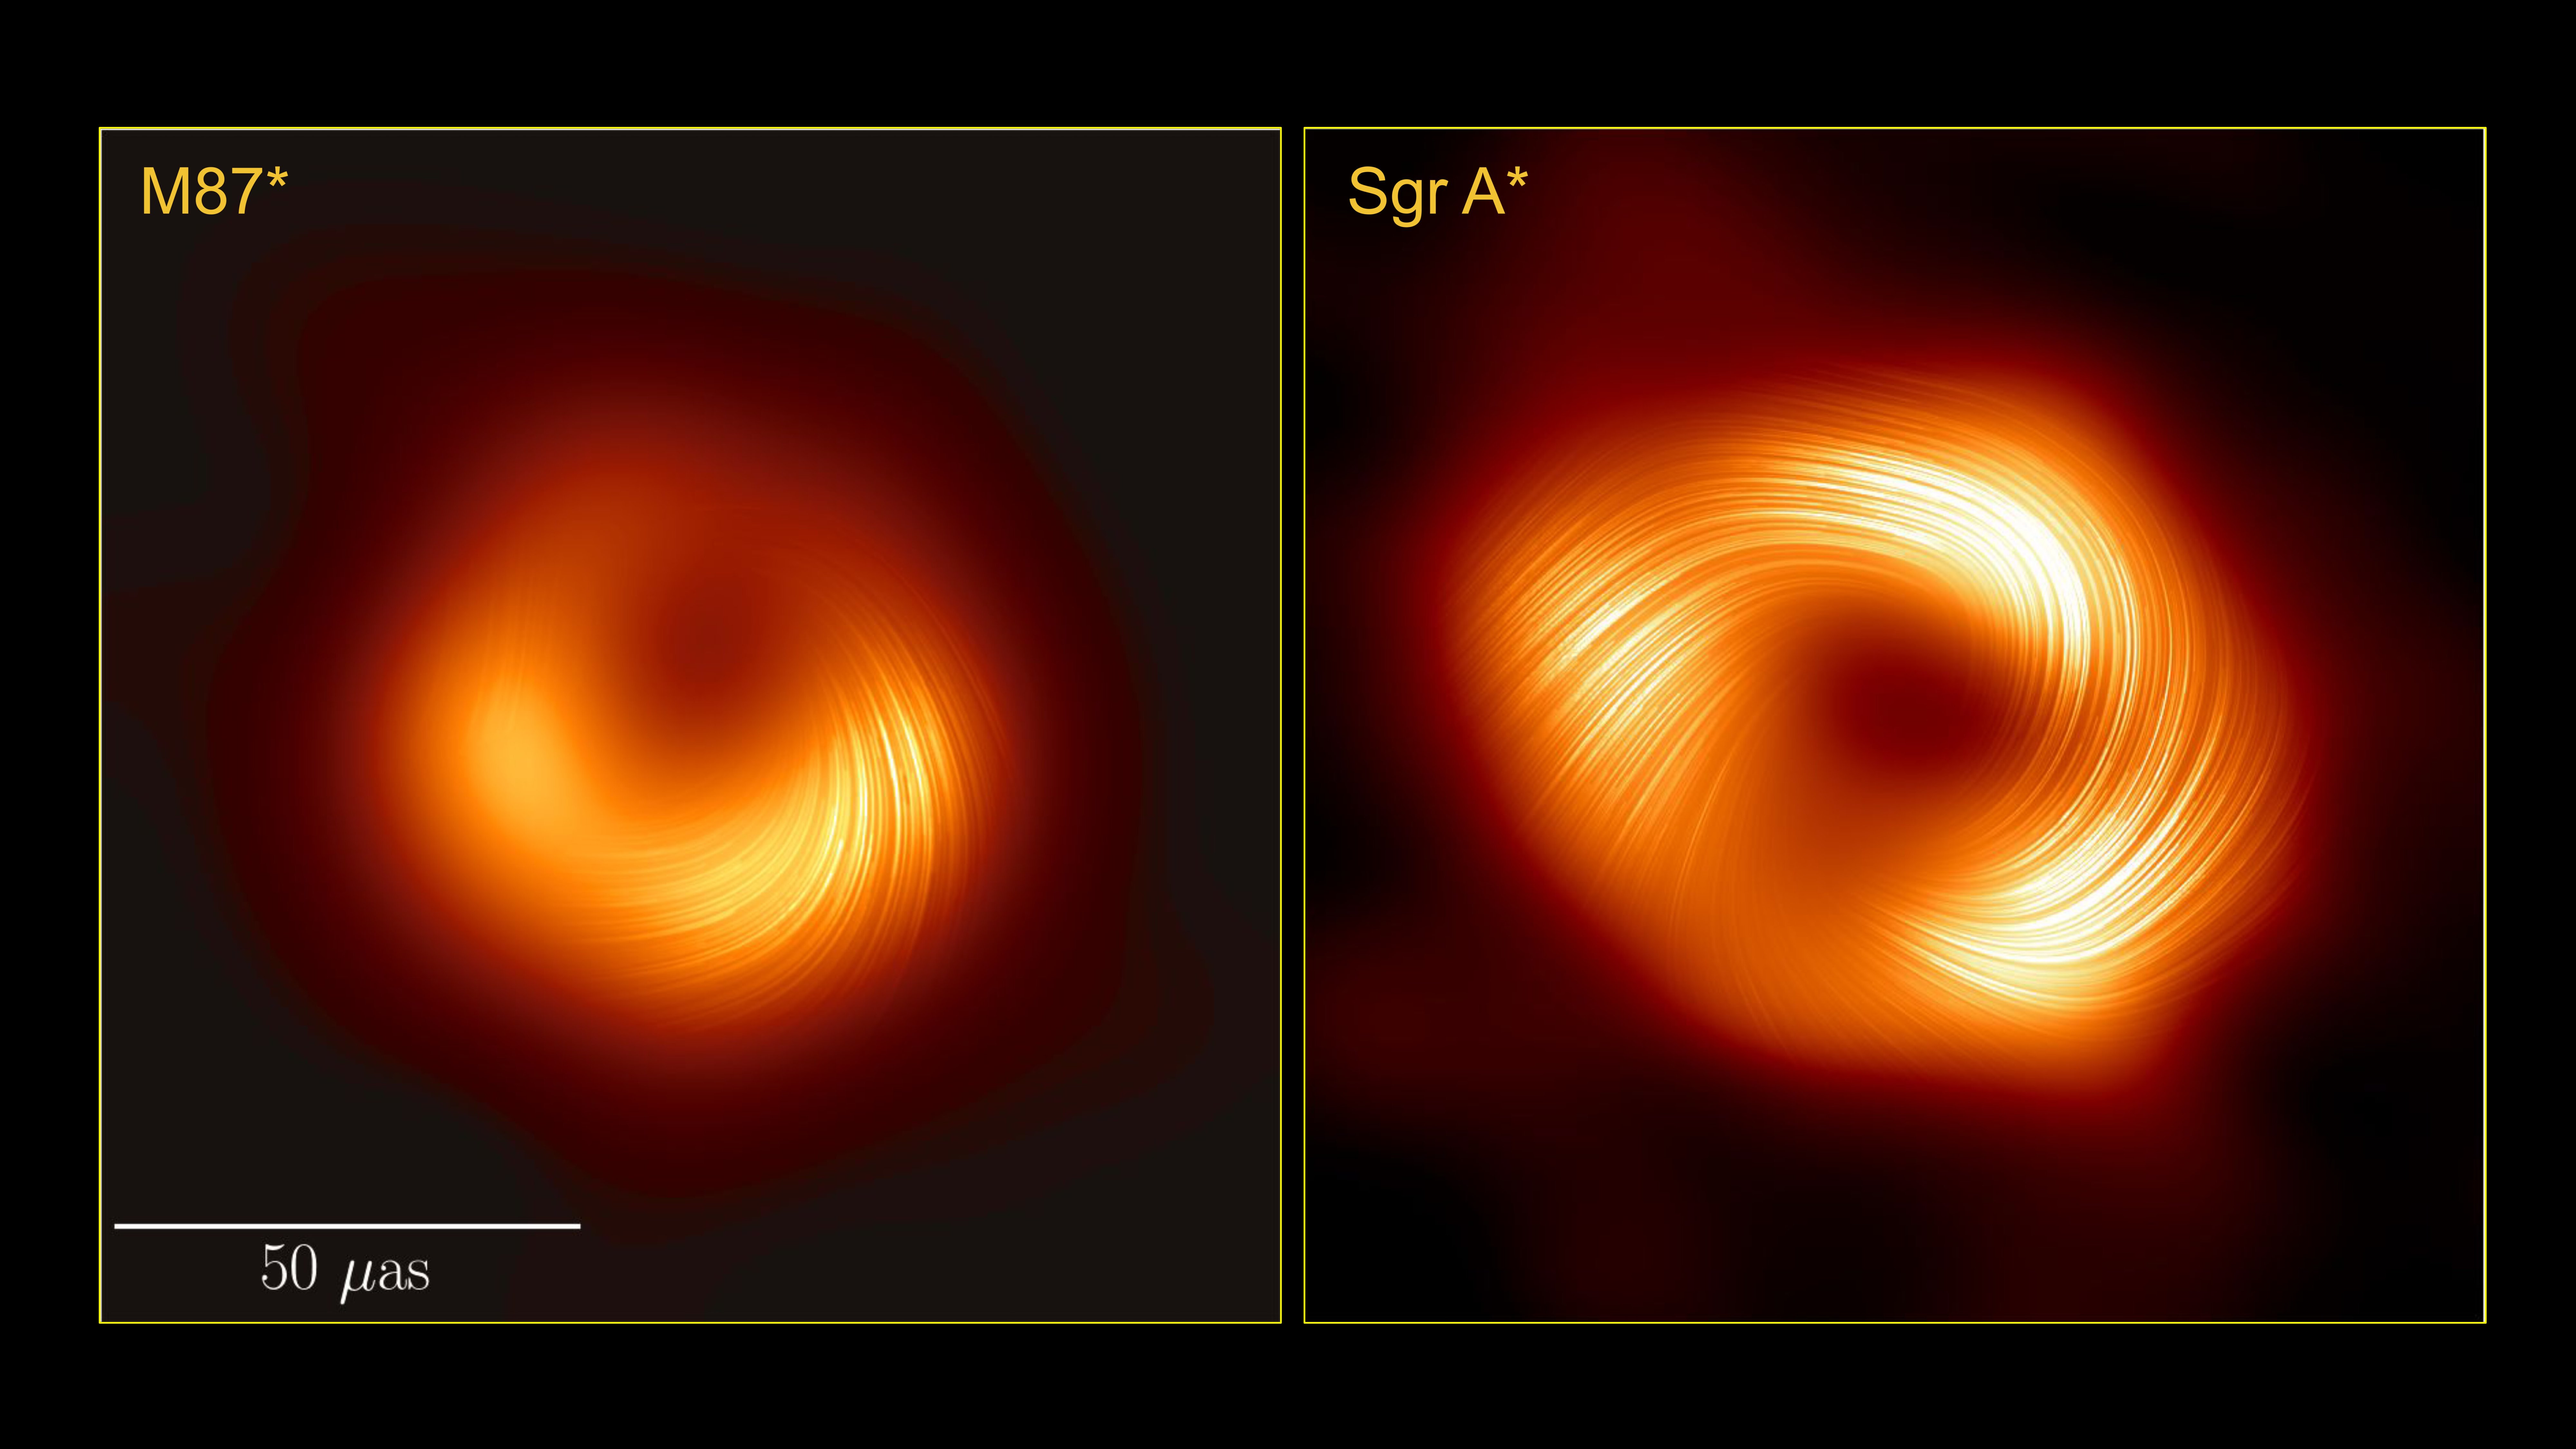 The supermassive black holes M87* (left) and Sagittarius A*, seen in polarized light